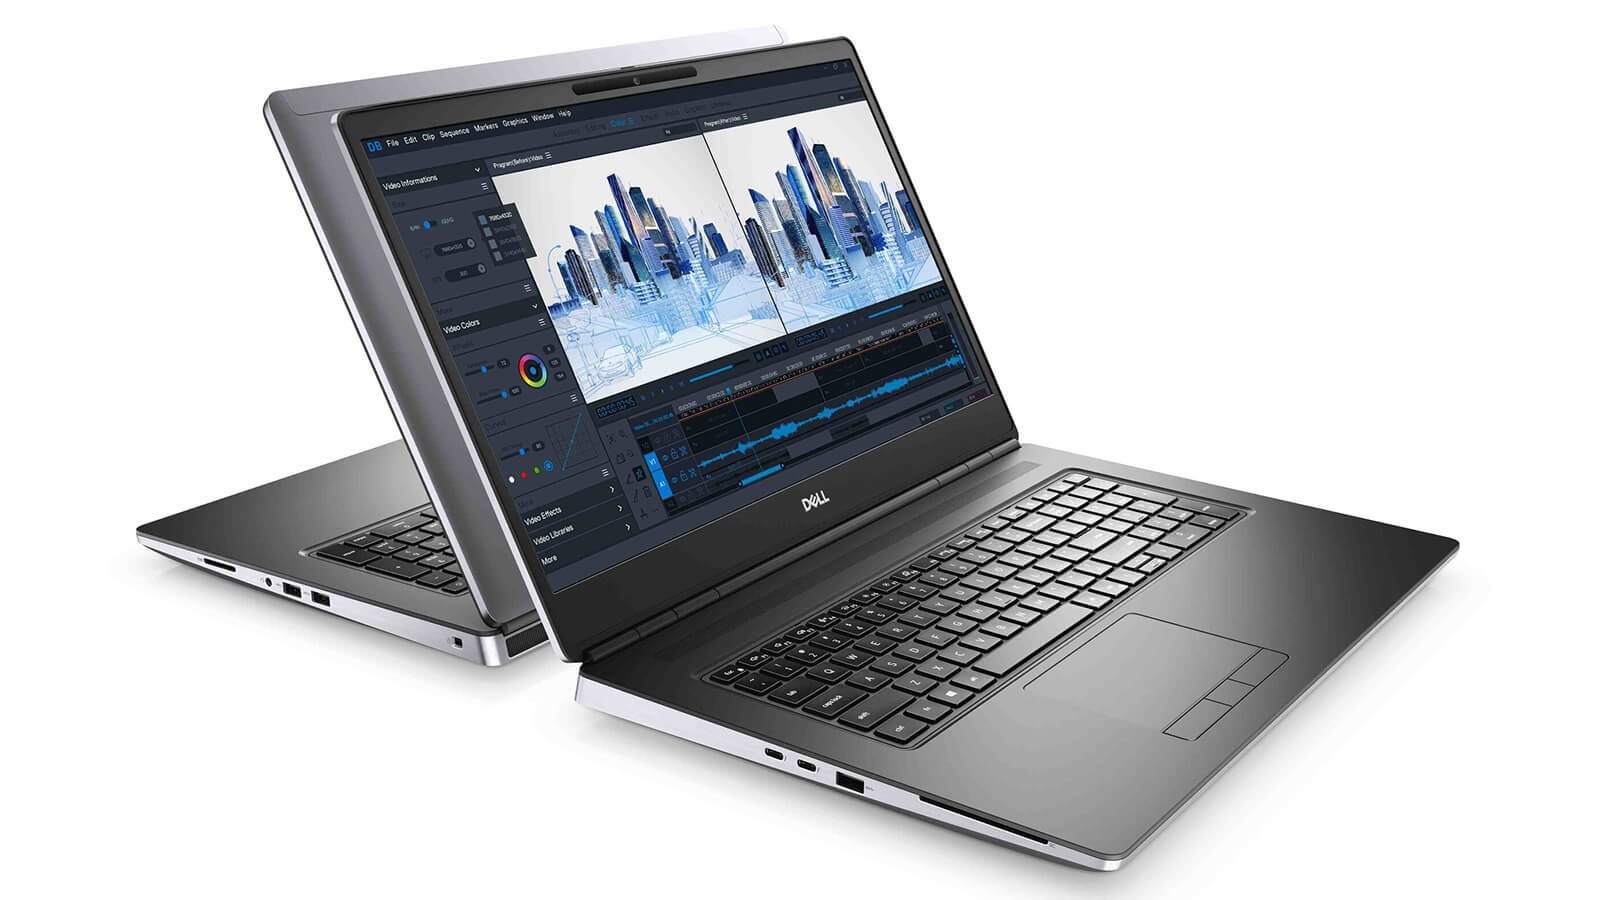 Dell Precision 7560 Mobile Workstation Features 04